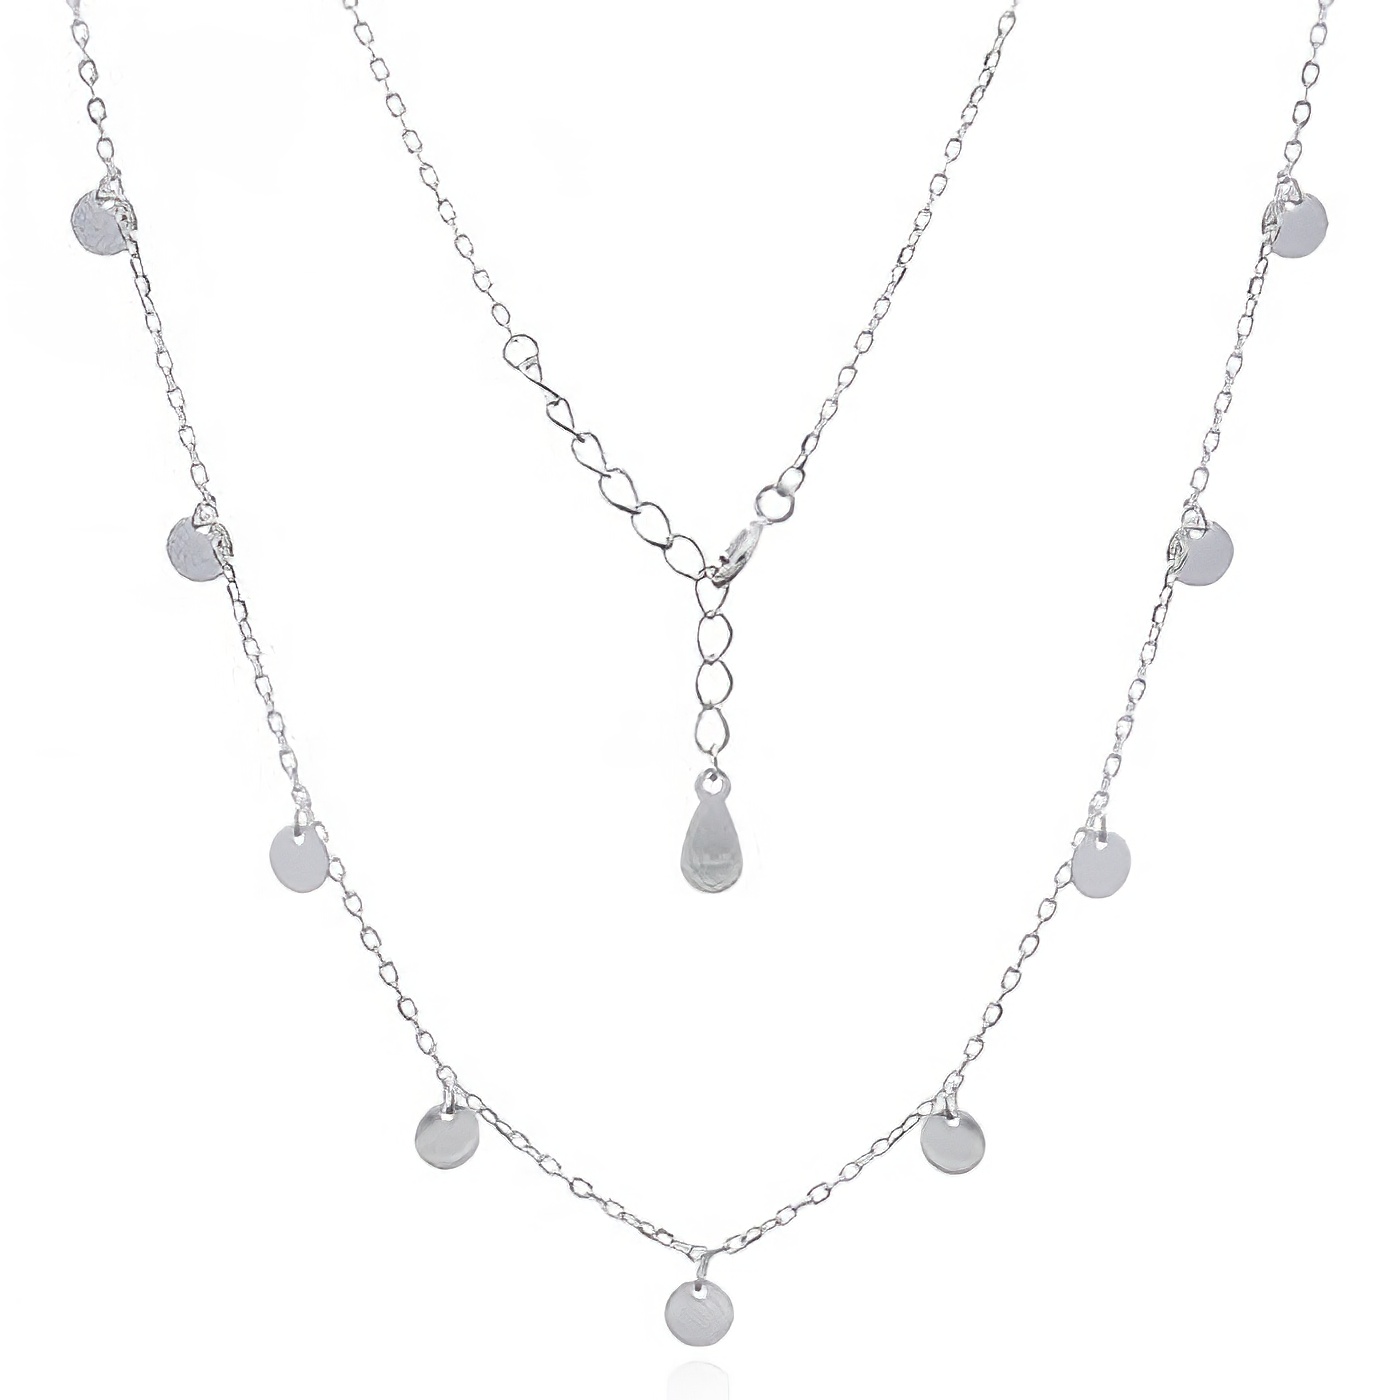 Silver Plated Discs 925 Chain Necklace by BeYindi 